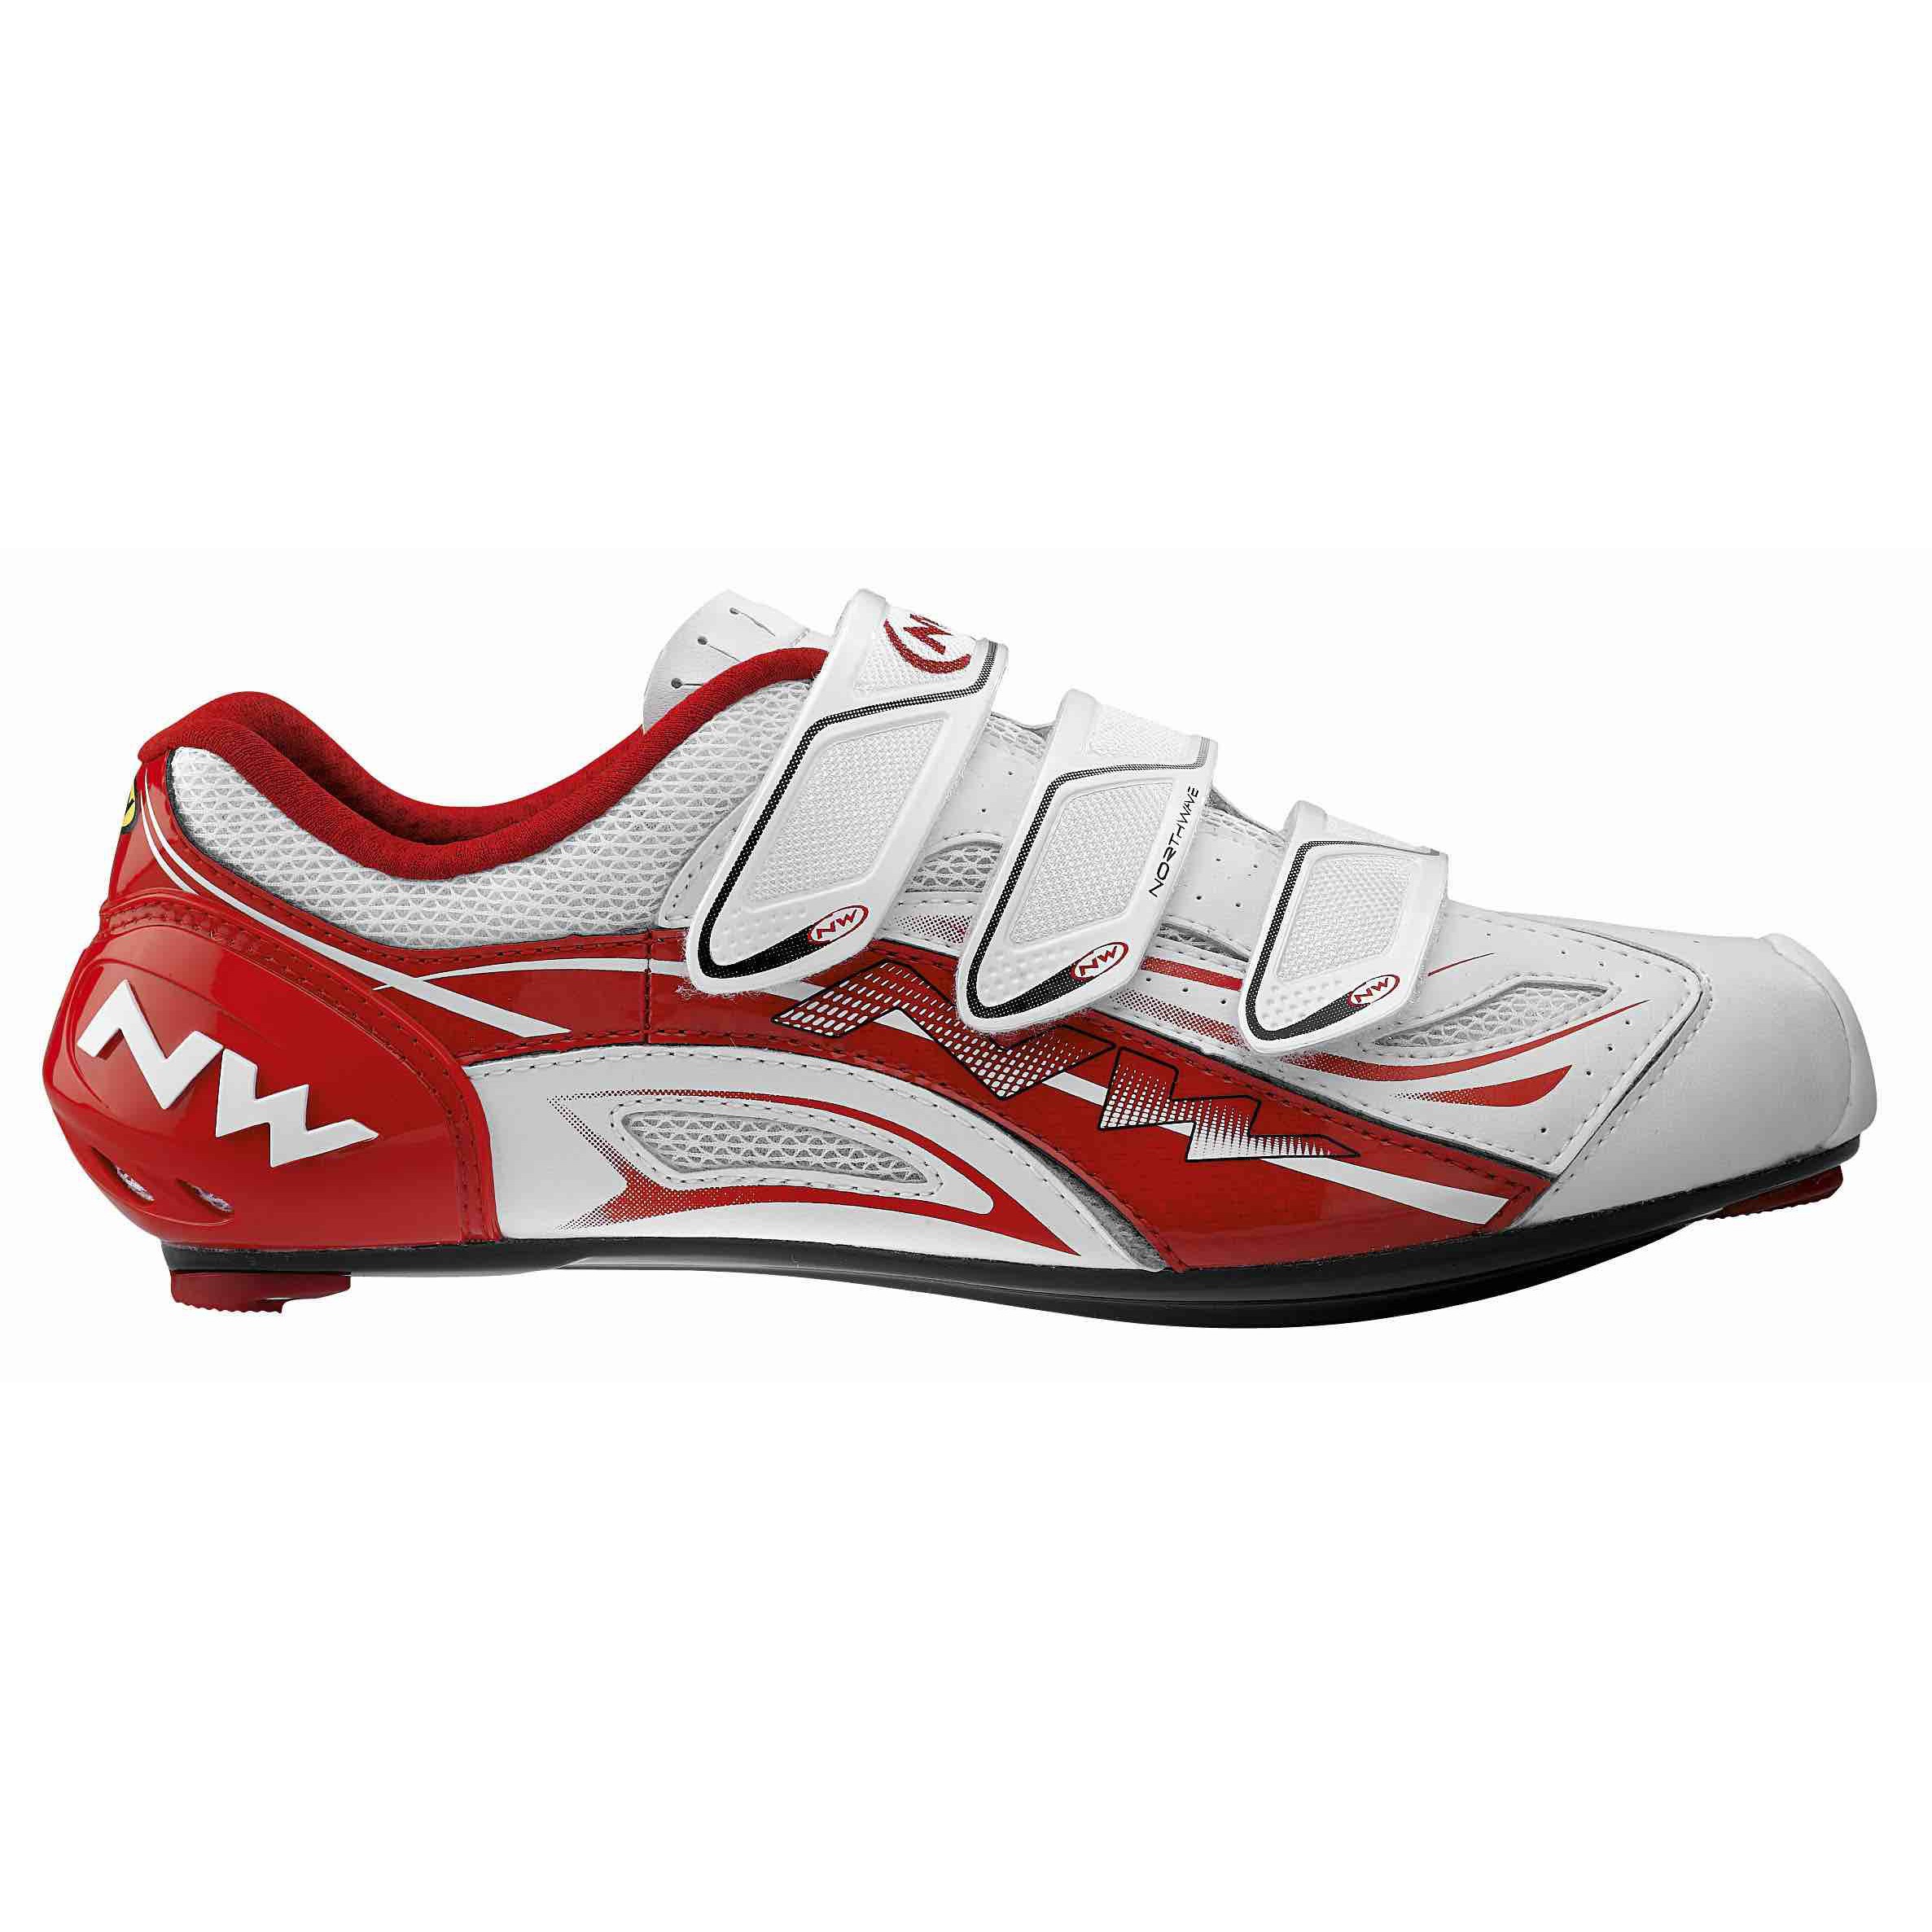 Northwave Typhoon EVO Men's Road Cycling Shoes Red/White EU 42